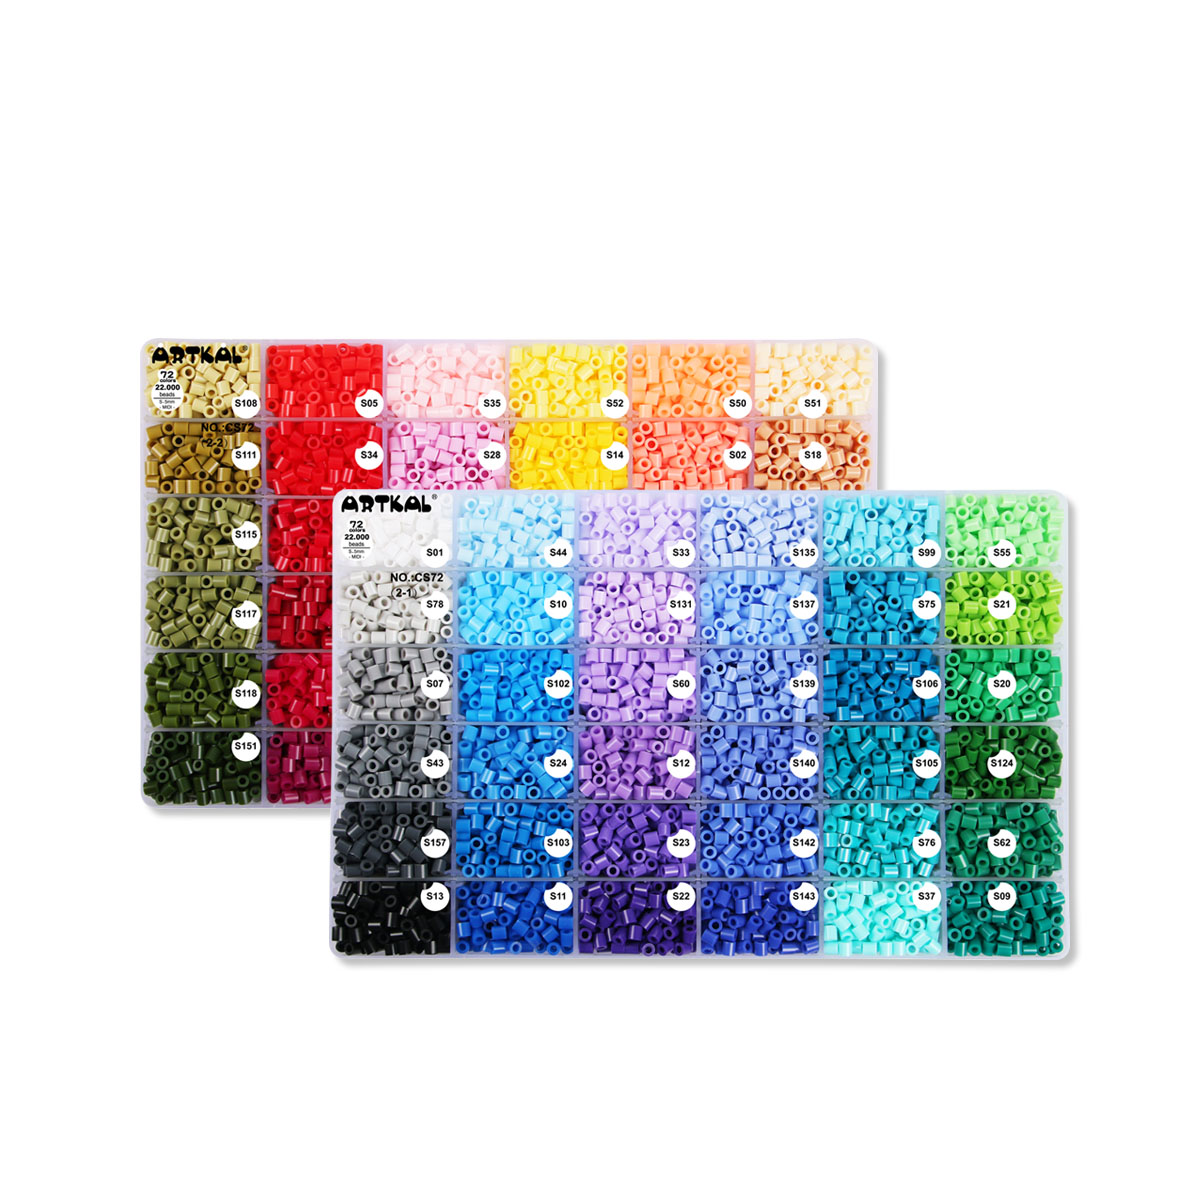 Artkal Fuse Beads Kit 72 Colors 11,600pcs Melting Beads Kit Compatible Perler Beads Hama Beads, Fusion Beads Kit with 5 ironing paper in a grid box